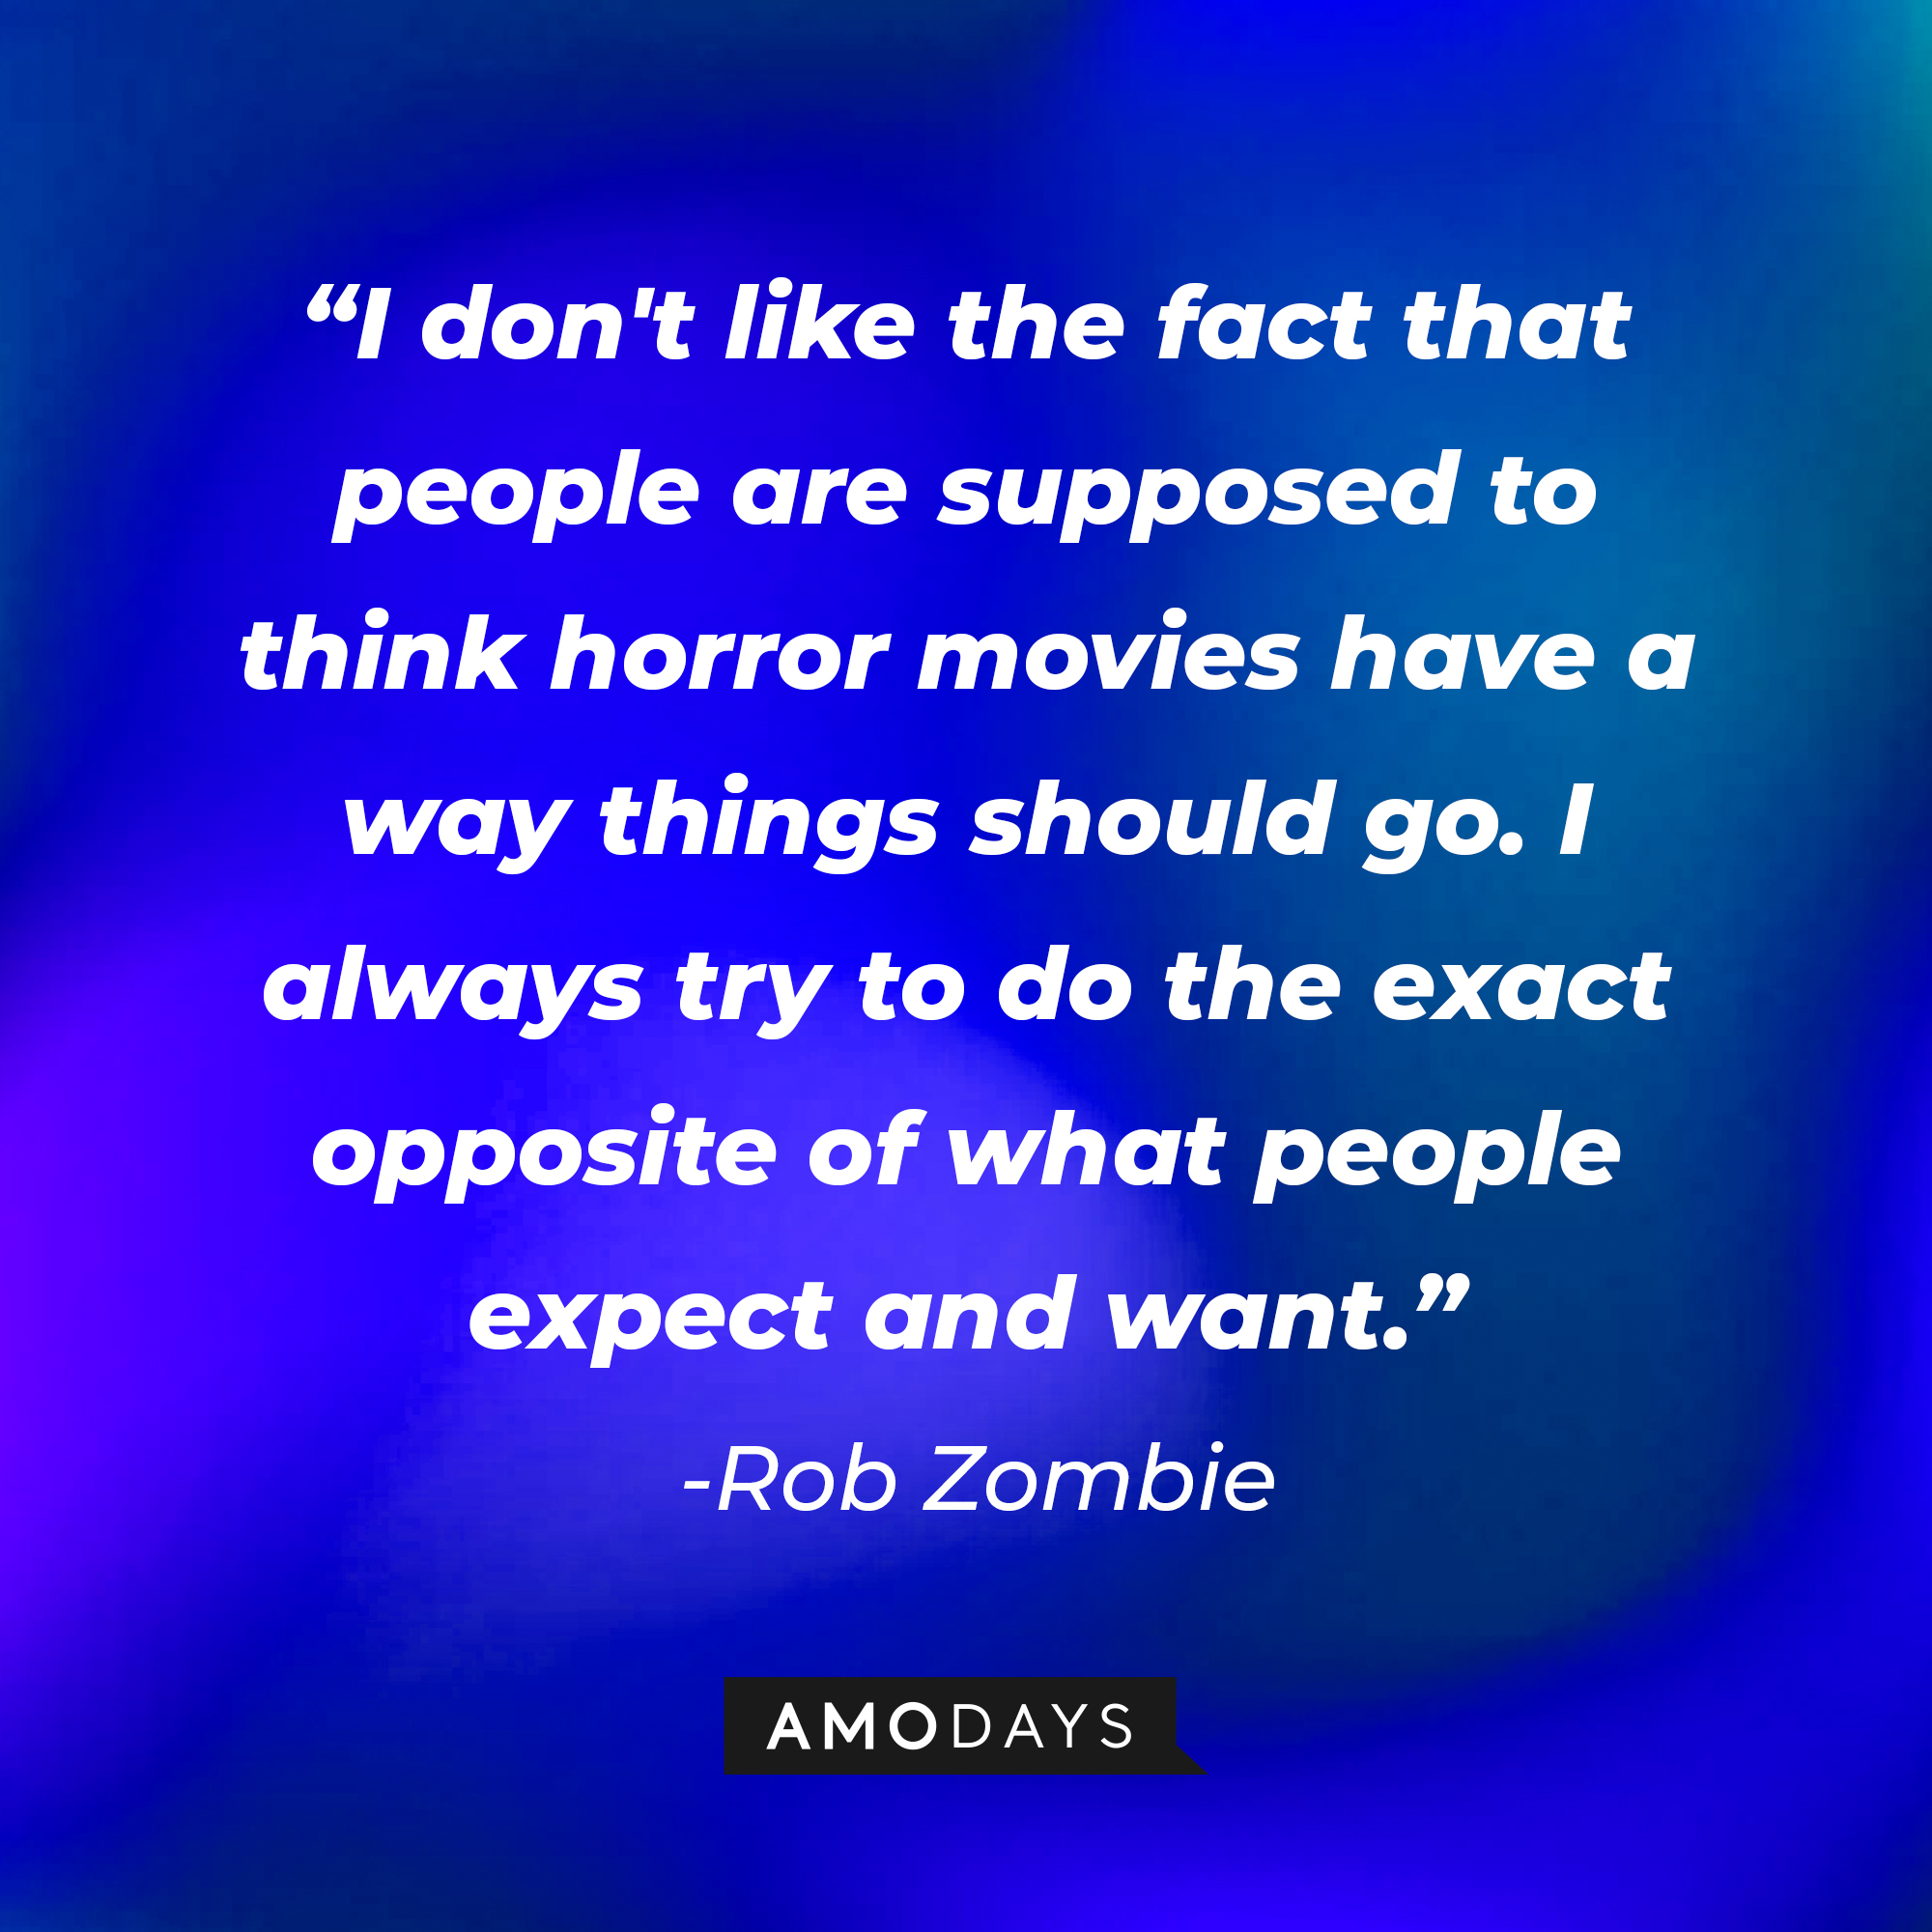 Rob Zombie's quote "I don't like the fact that people are supposed to think horror movies have a way things should go. I always try to do the exact opposite of what people expect and want." | Source: AmoDays